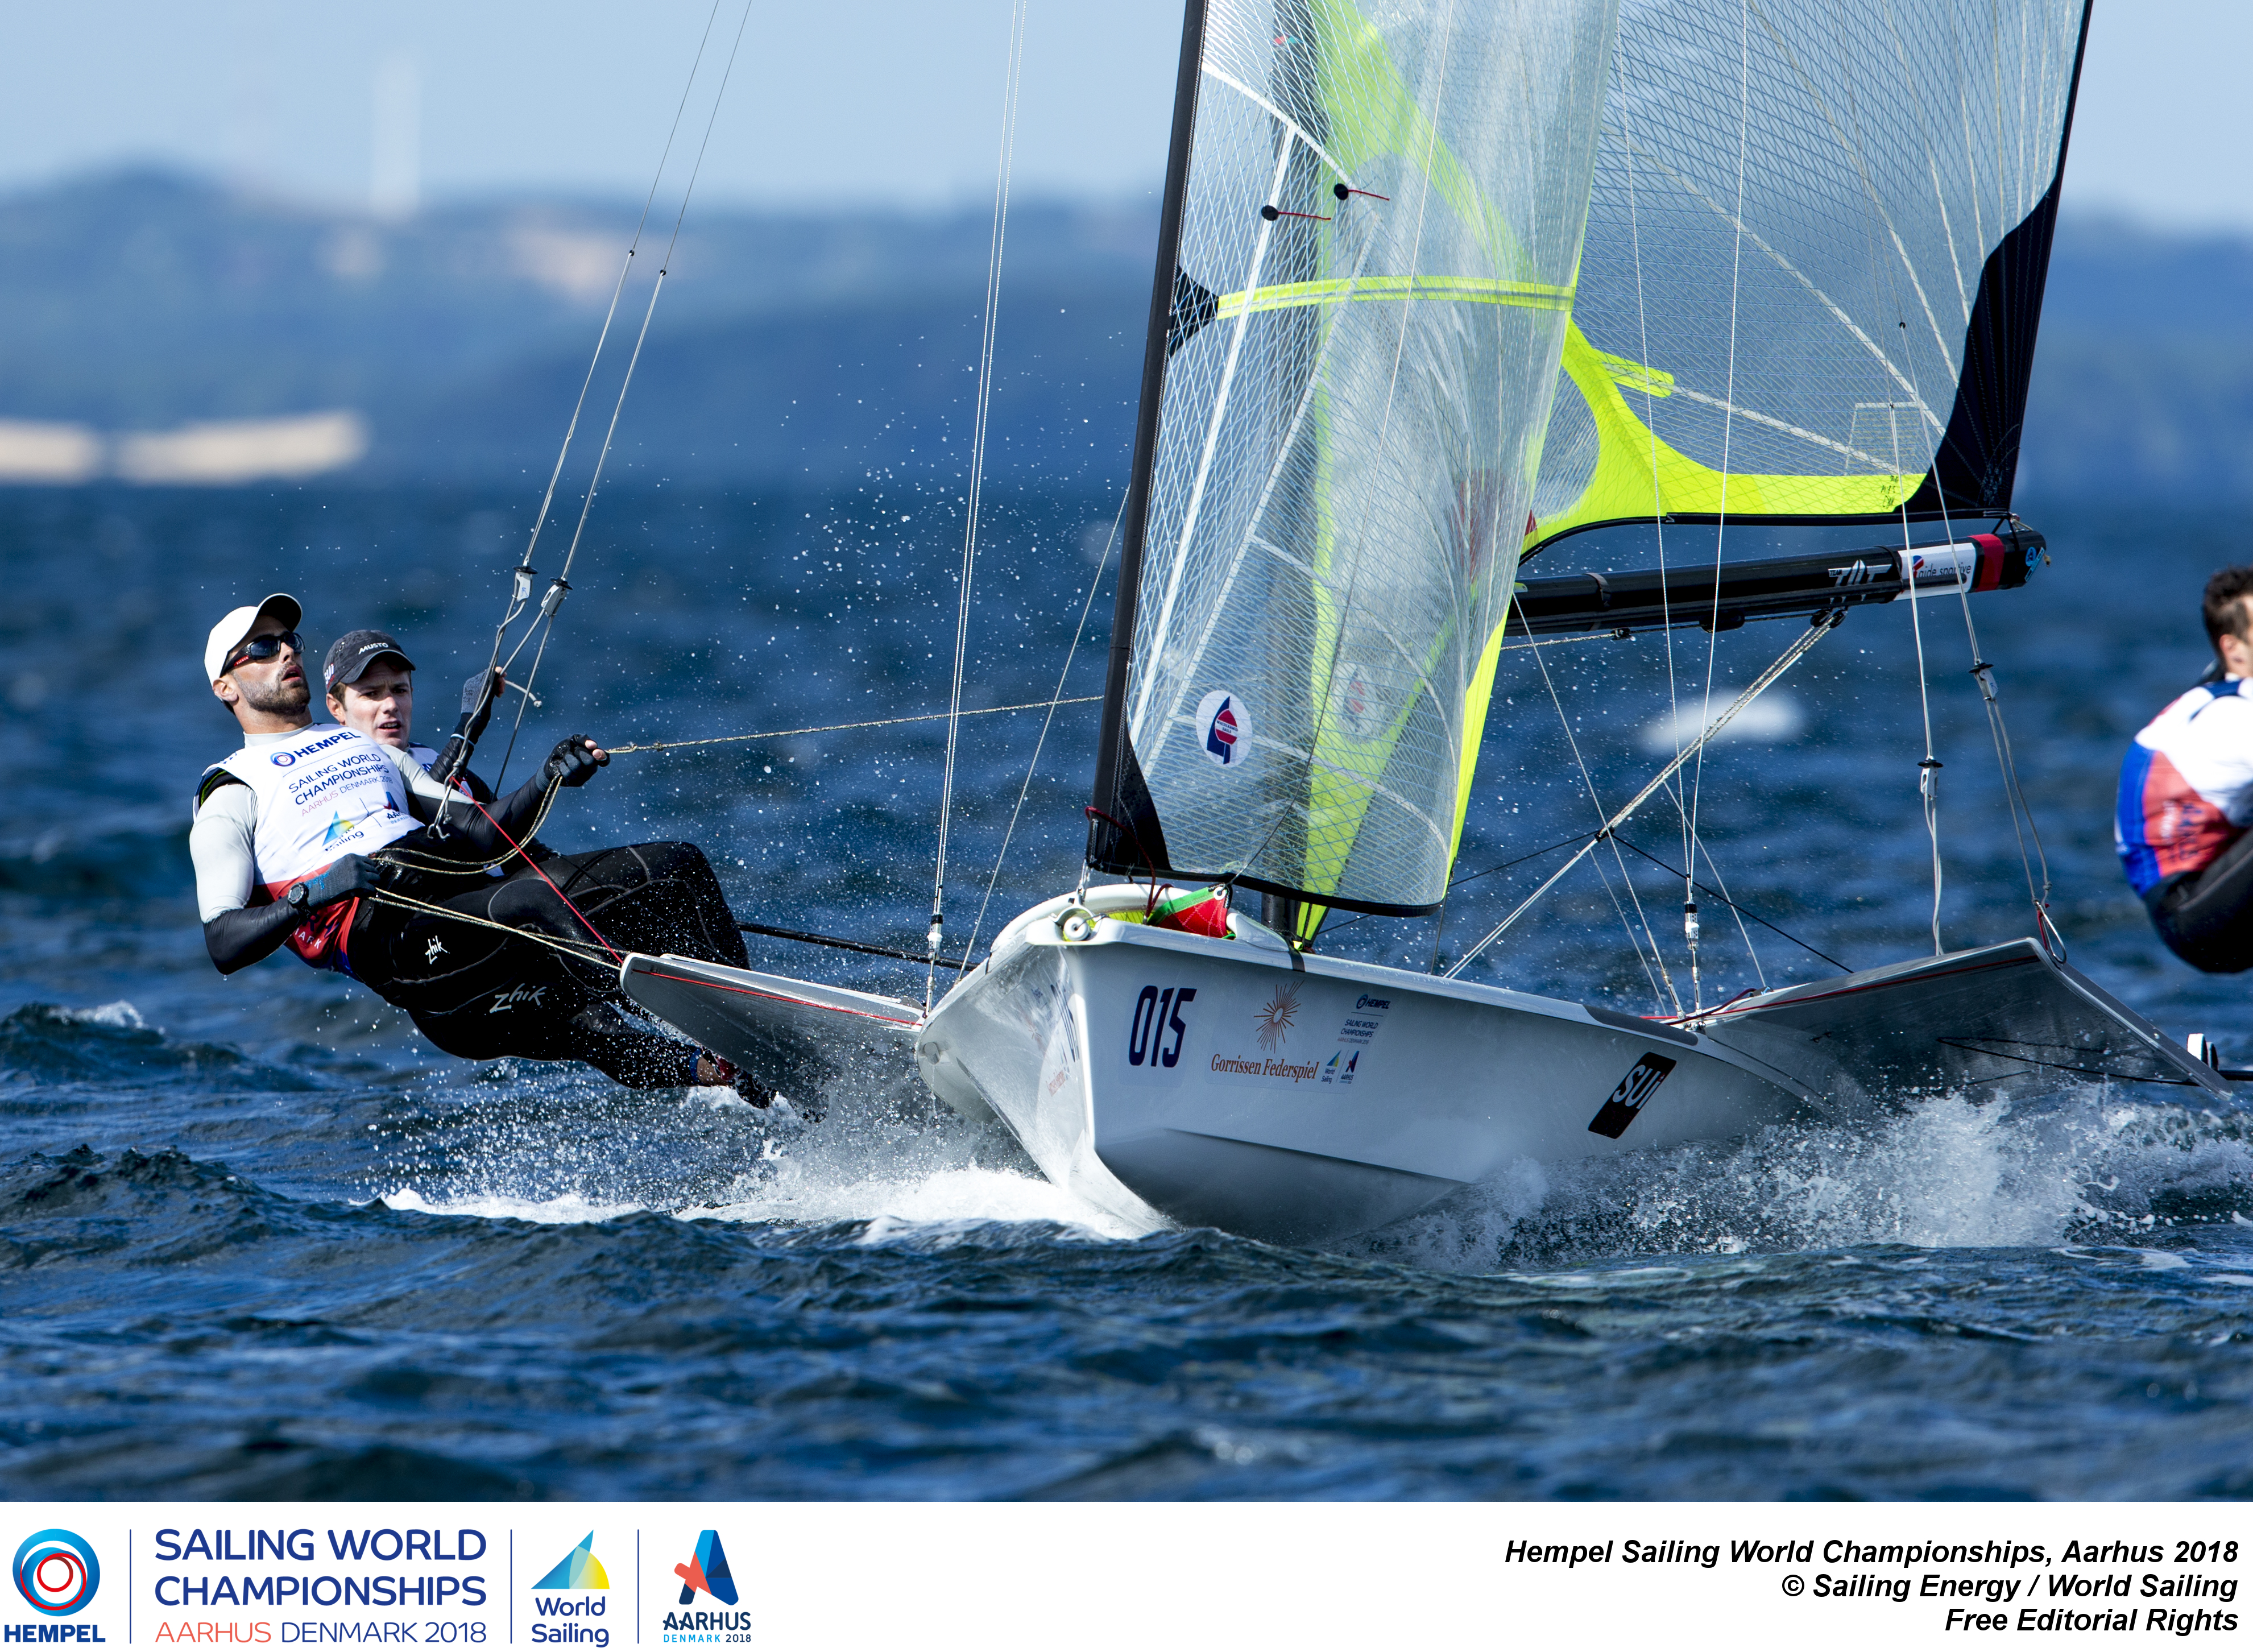  Olympic Classes  World Championships 2018  Aarhus DEN  Day 3  Les Suisses